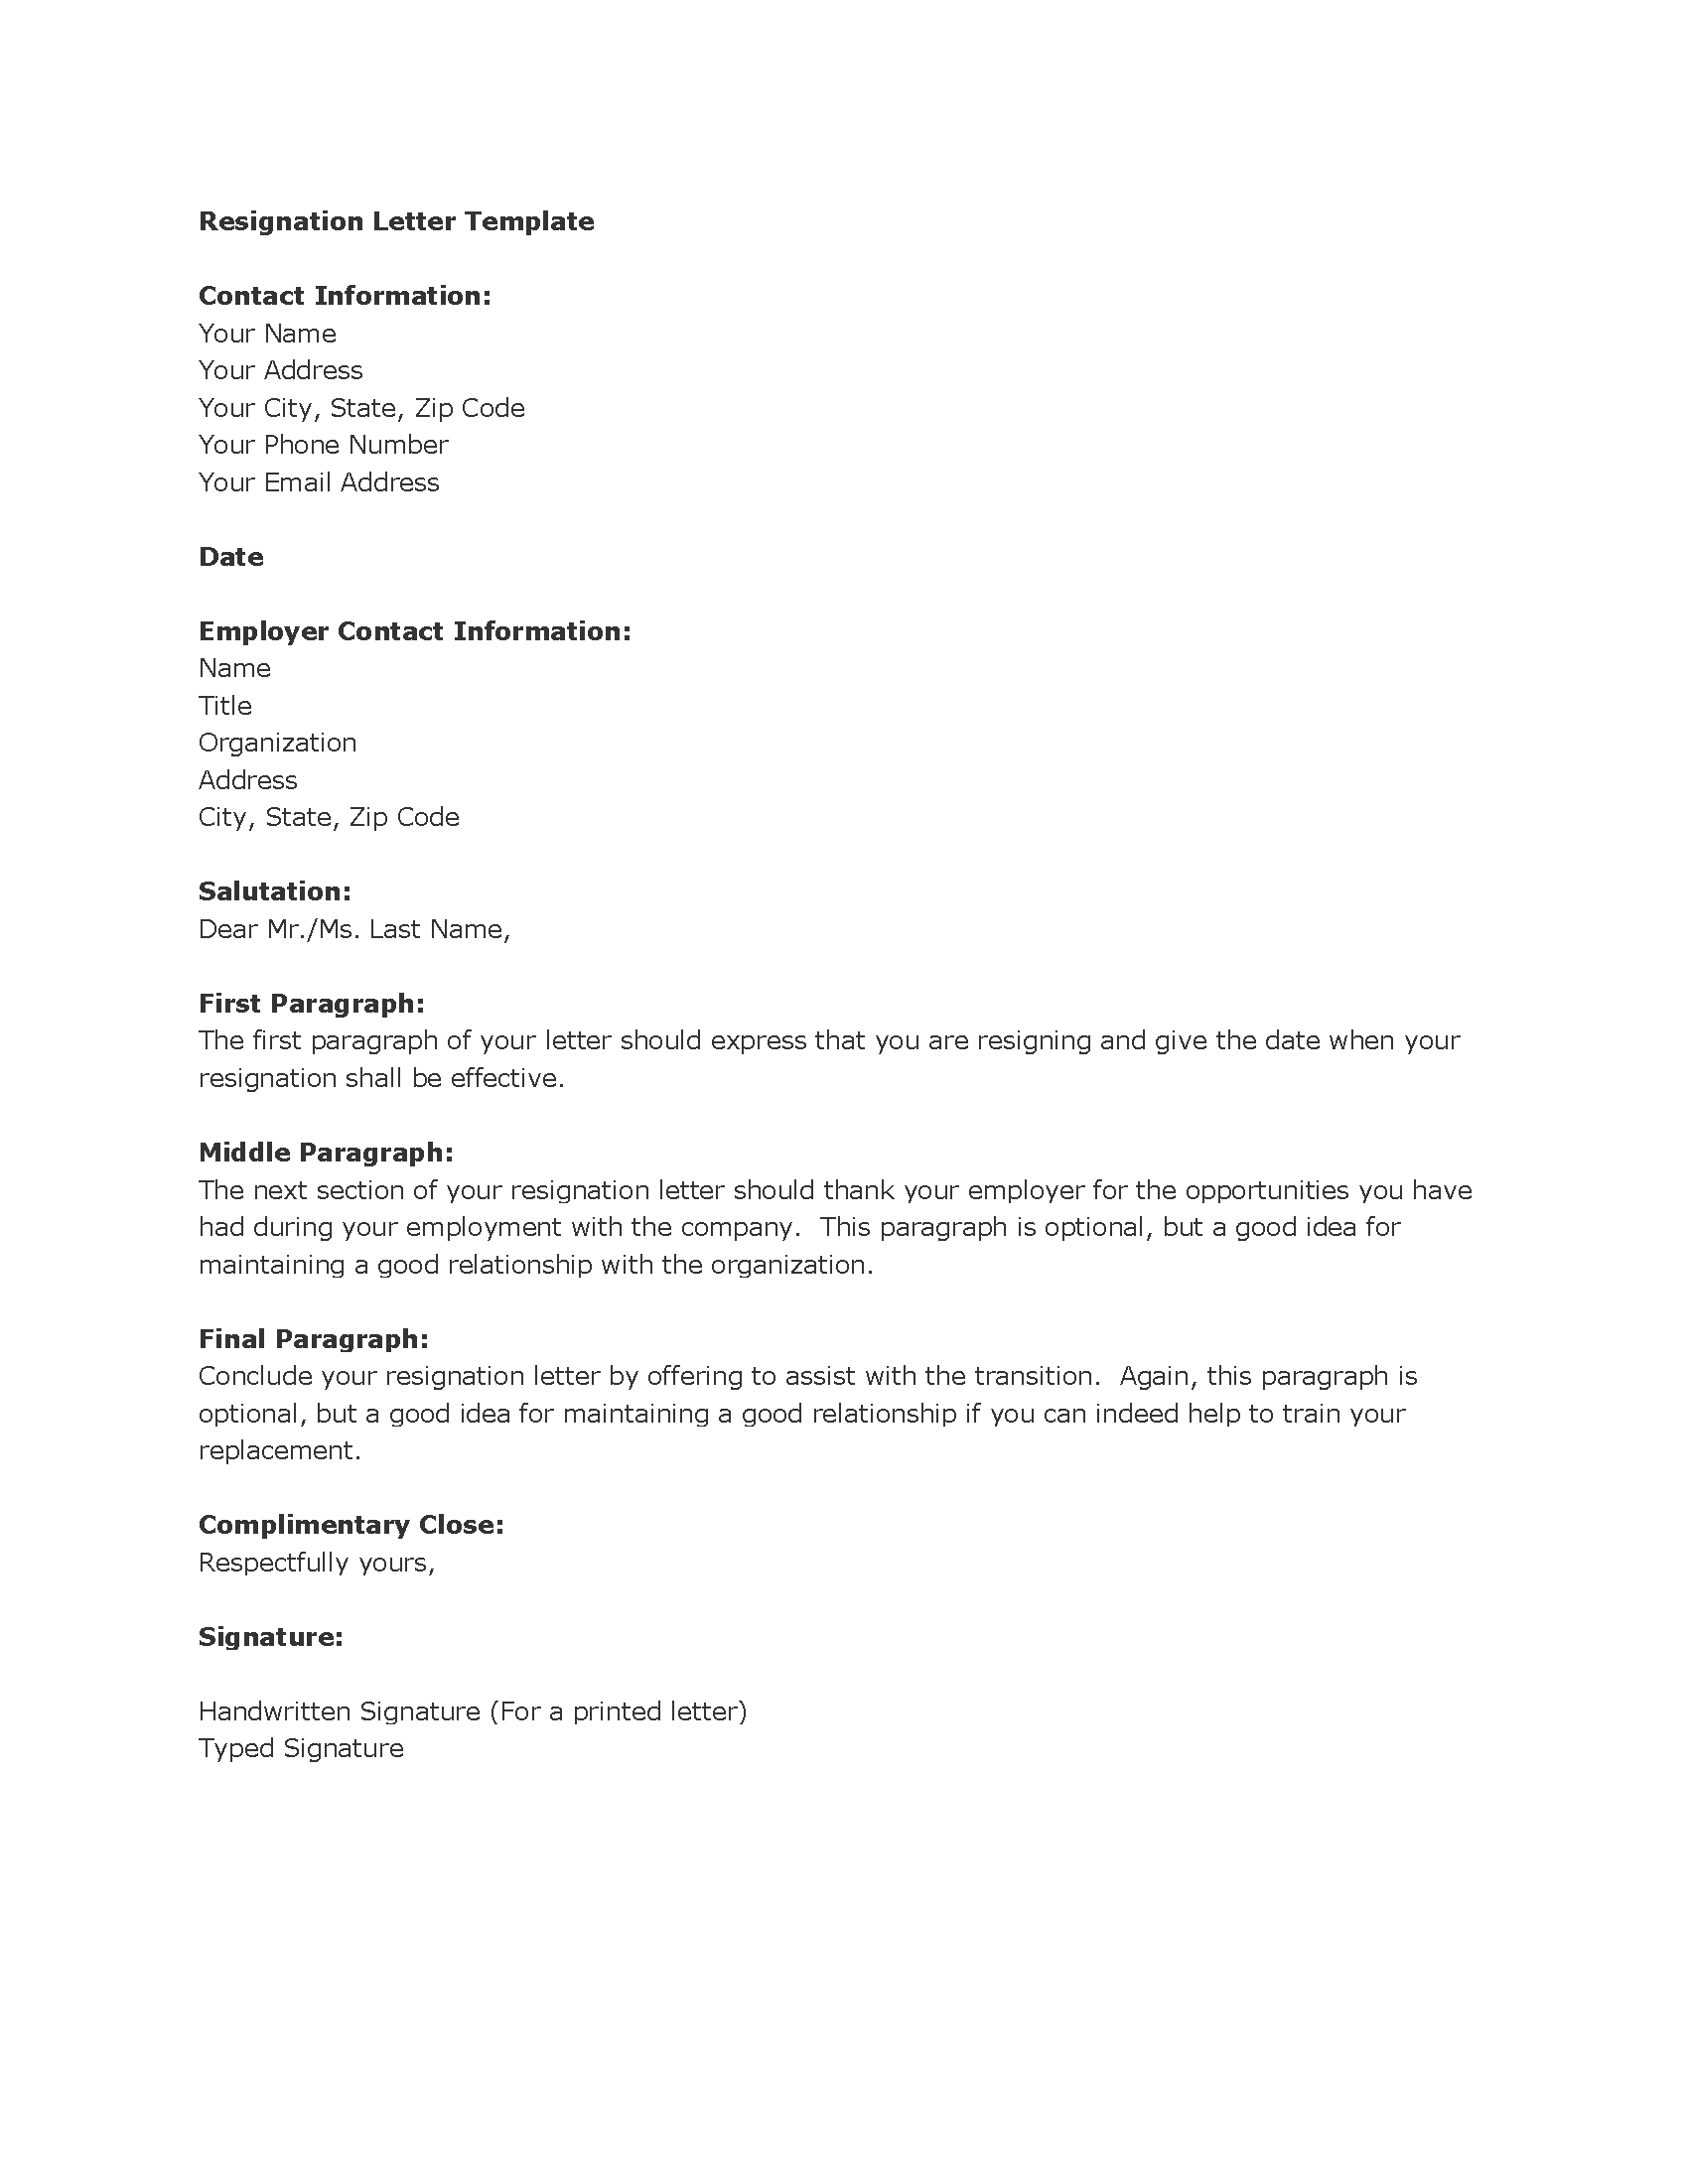 Resignation Letter Template Free Luxury Resignation Letter Templates